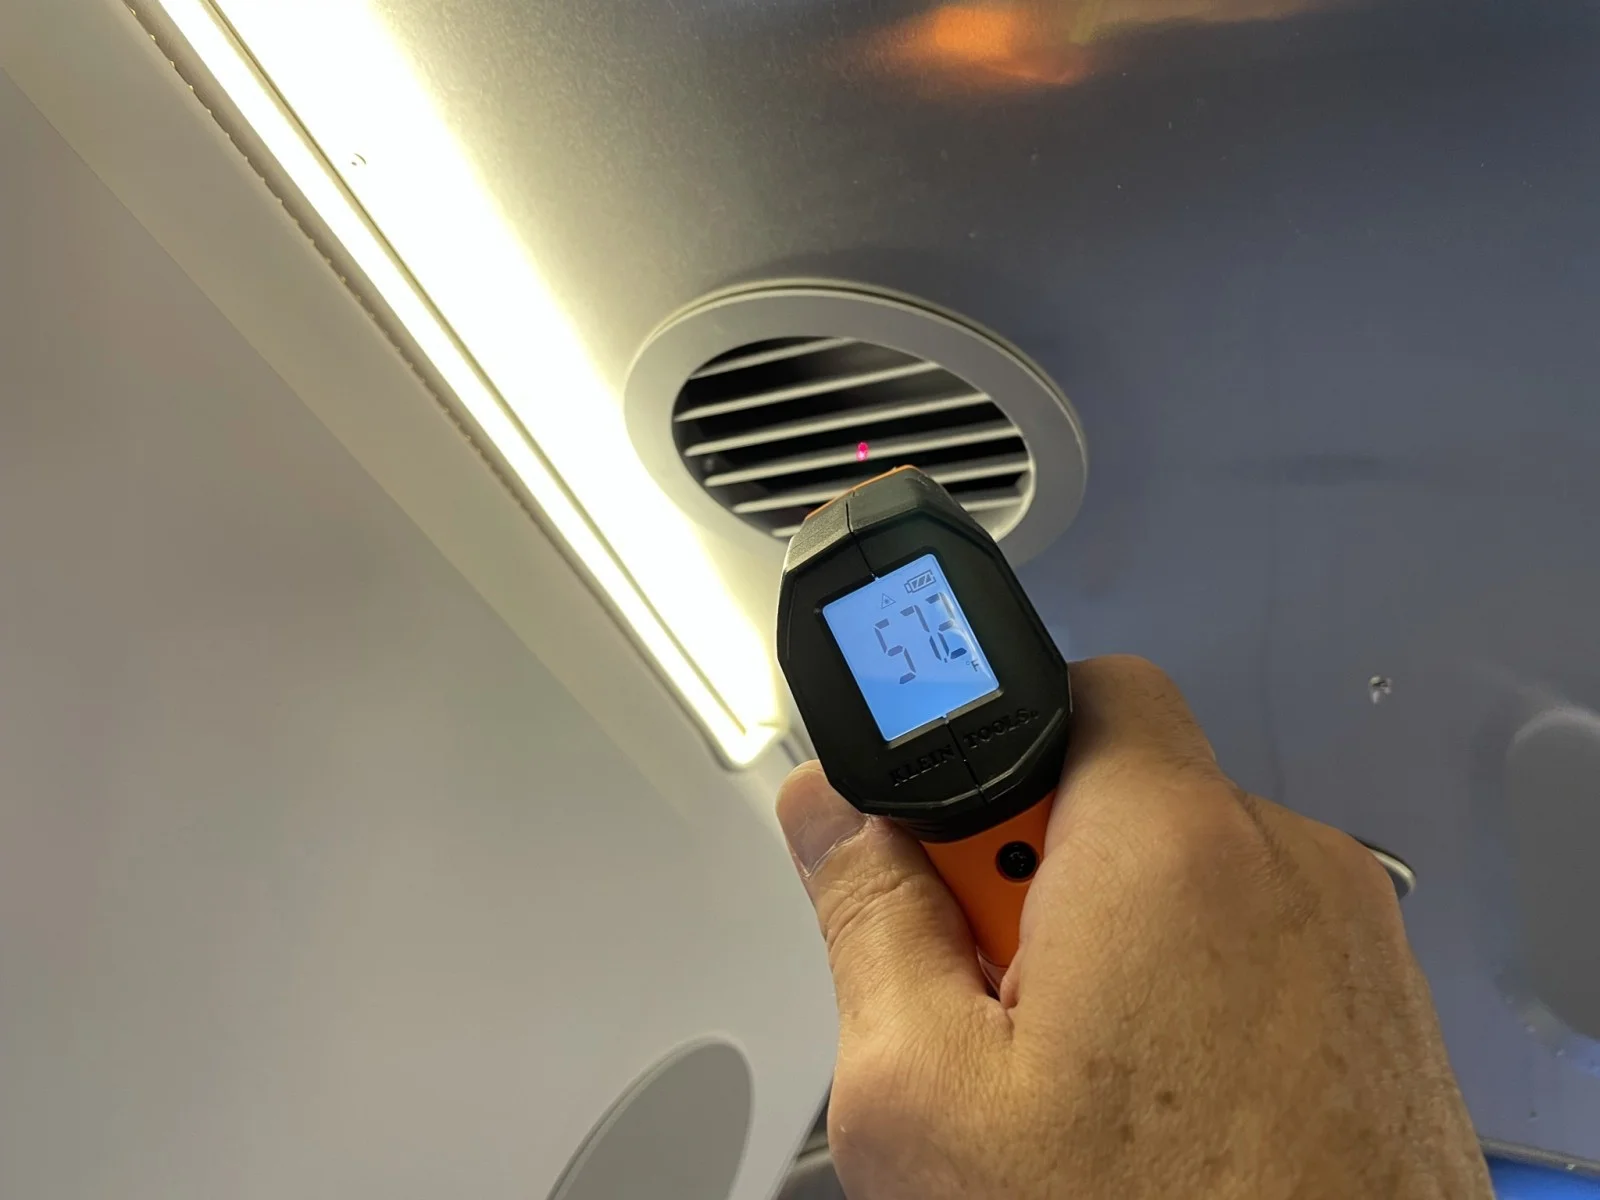 The supply air temperature ranged between 55 and 60℉ after our modifications of our Airstream AC system.